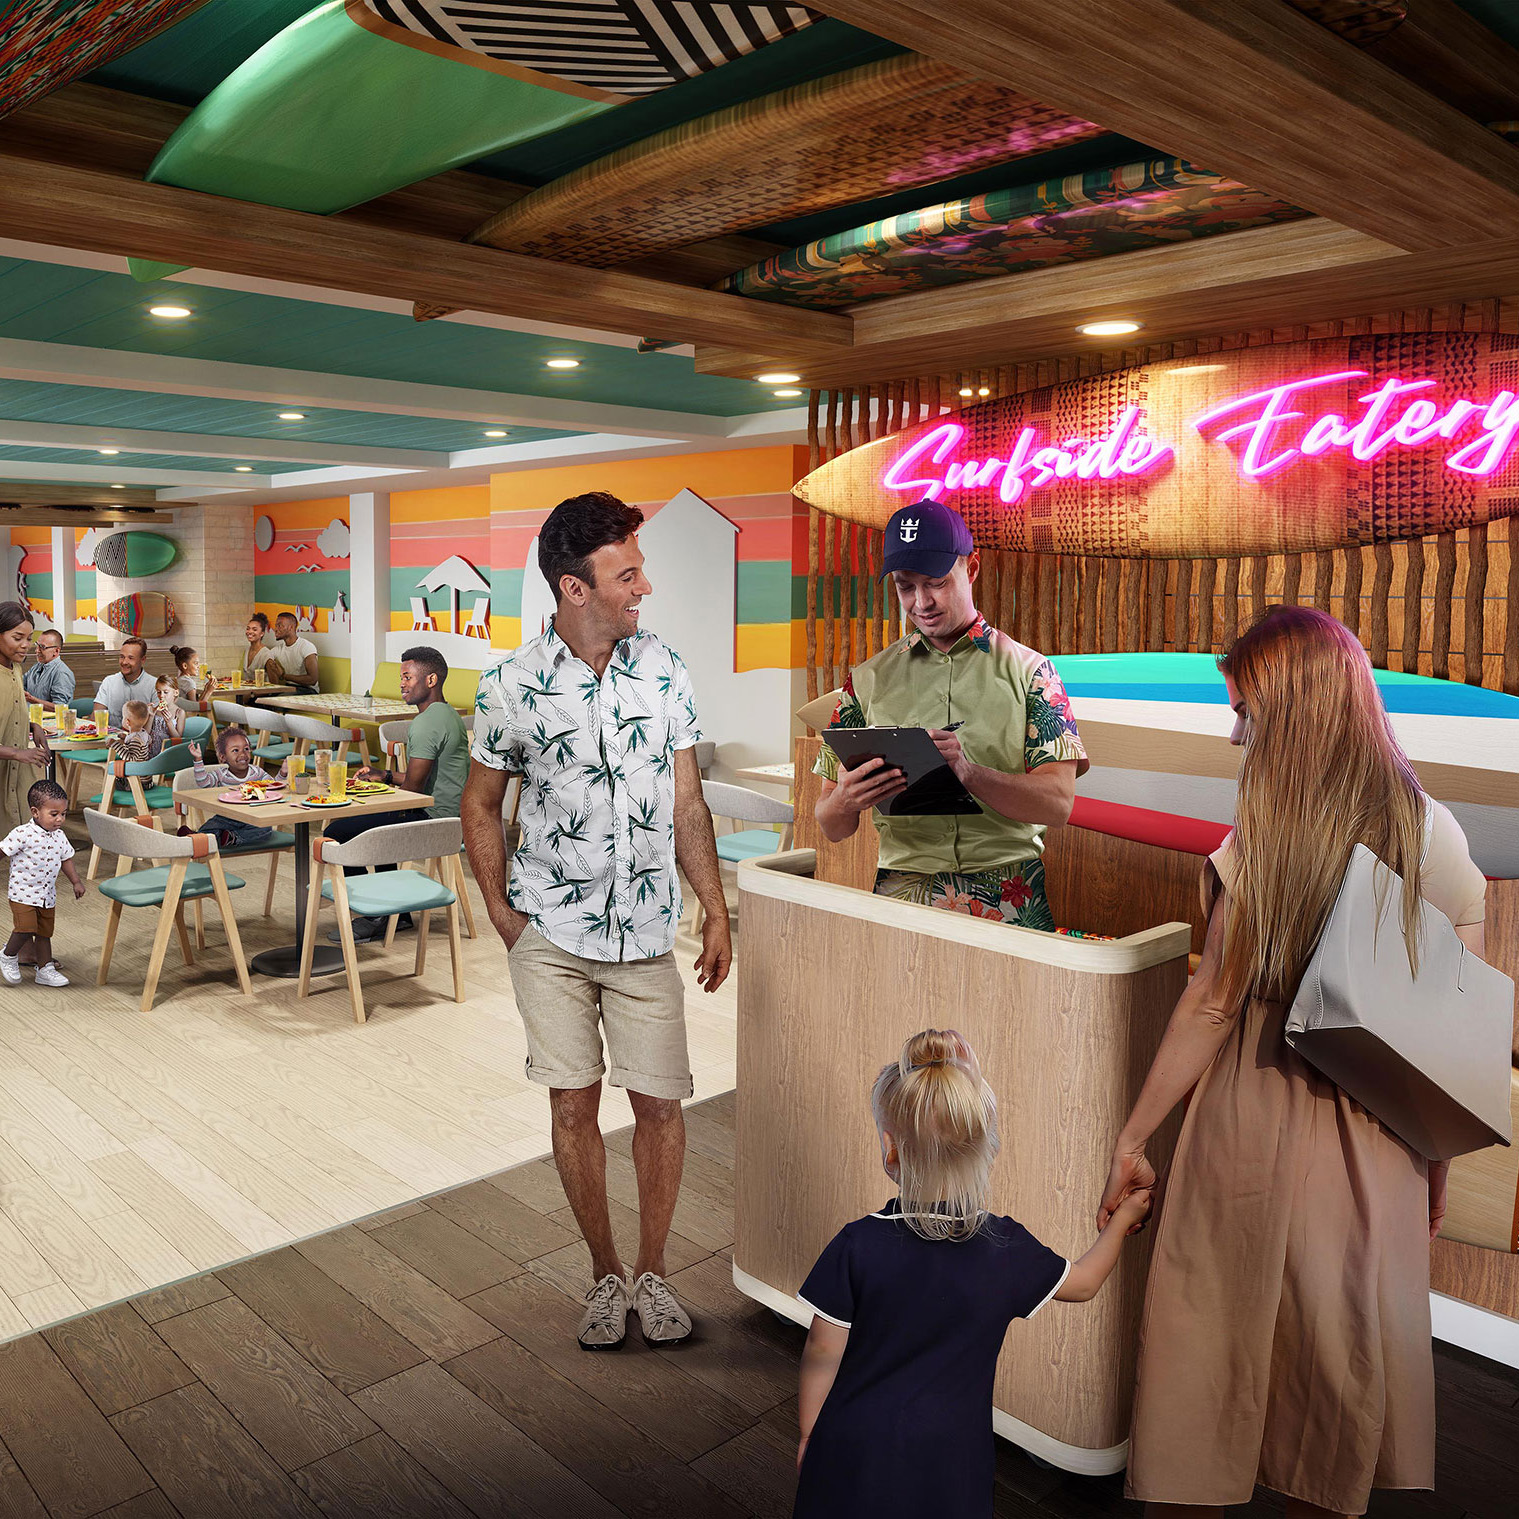 Surfside Eatery is the new buffet dedicated to families in Surfside, the stay-all-day neighborhood for young families on Icon of the Seas, where all ages have options to enjoy.